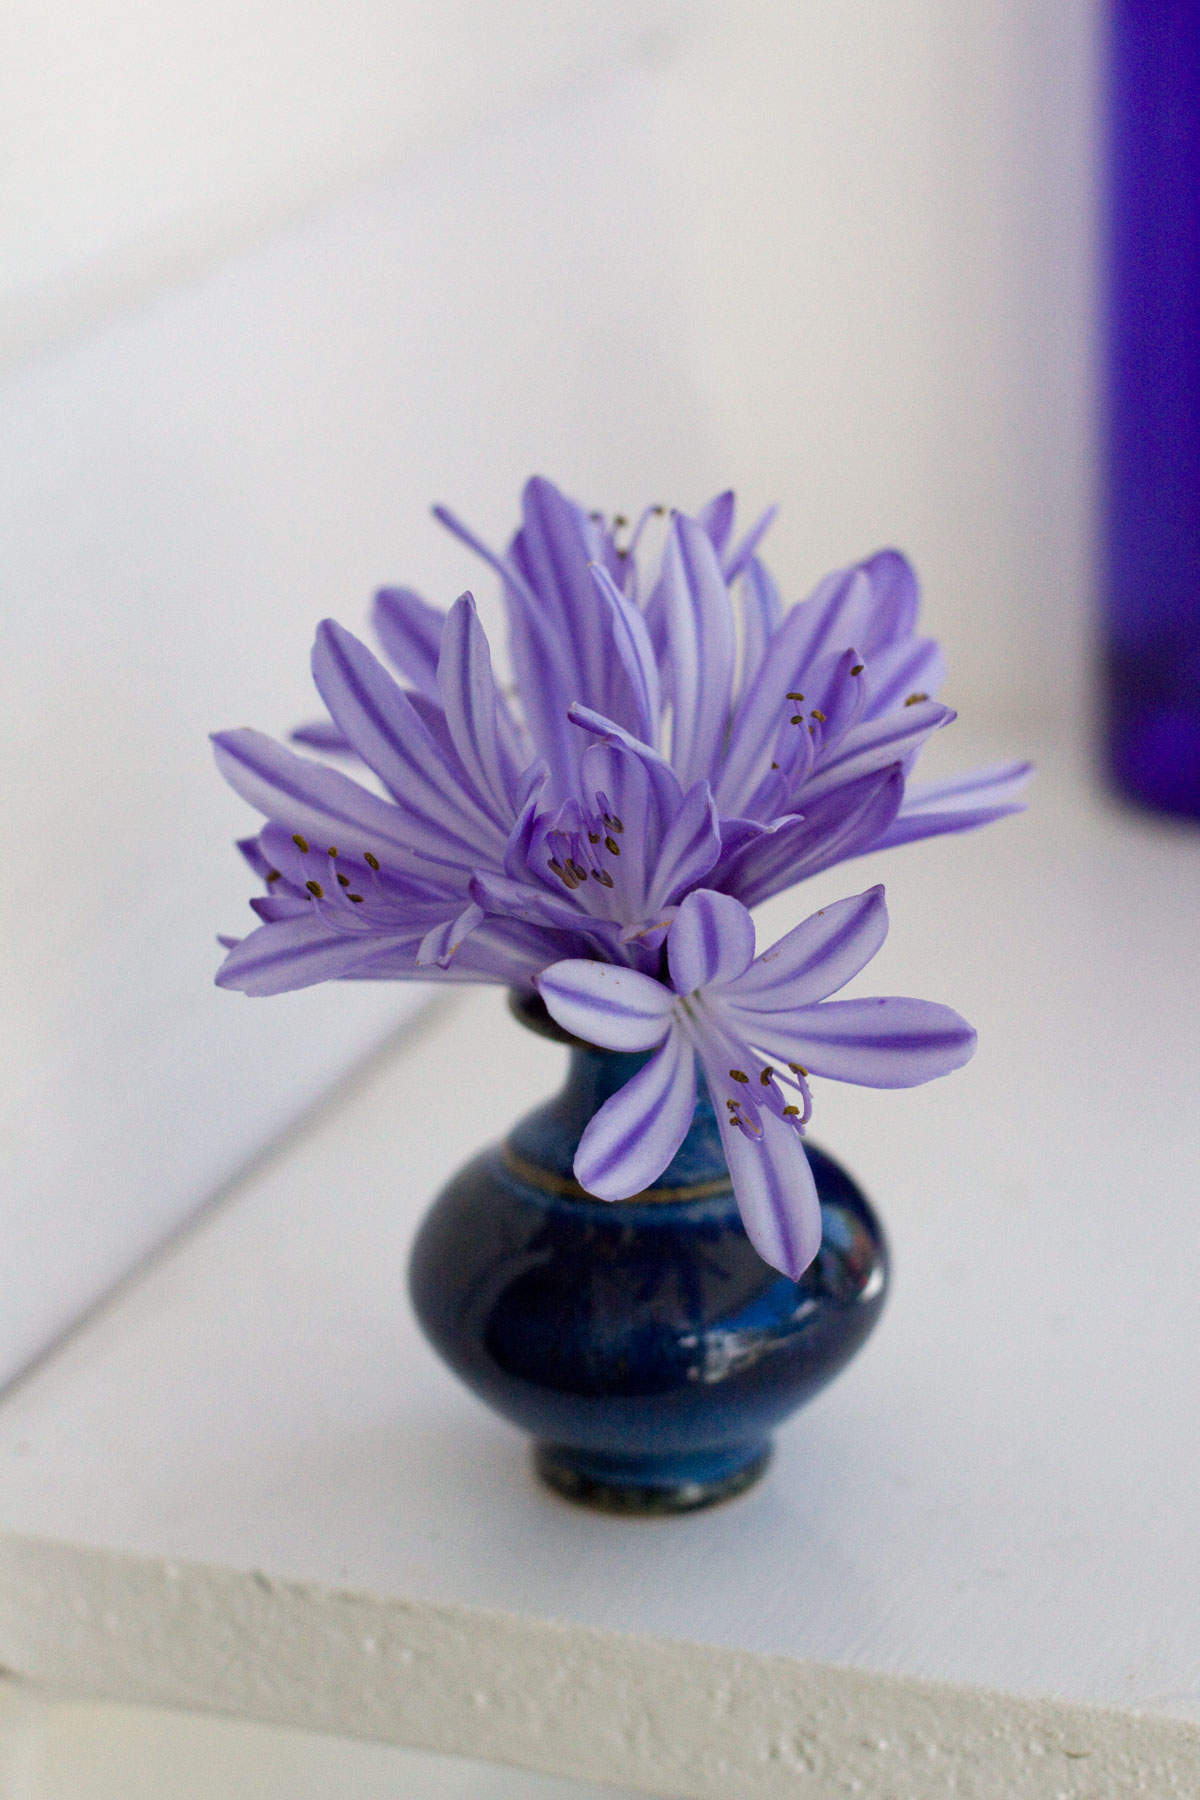 Easy Tiny Flower Arrangements - 3 Ways with Agapanthus DIY